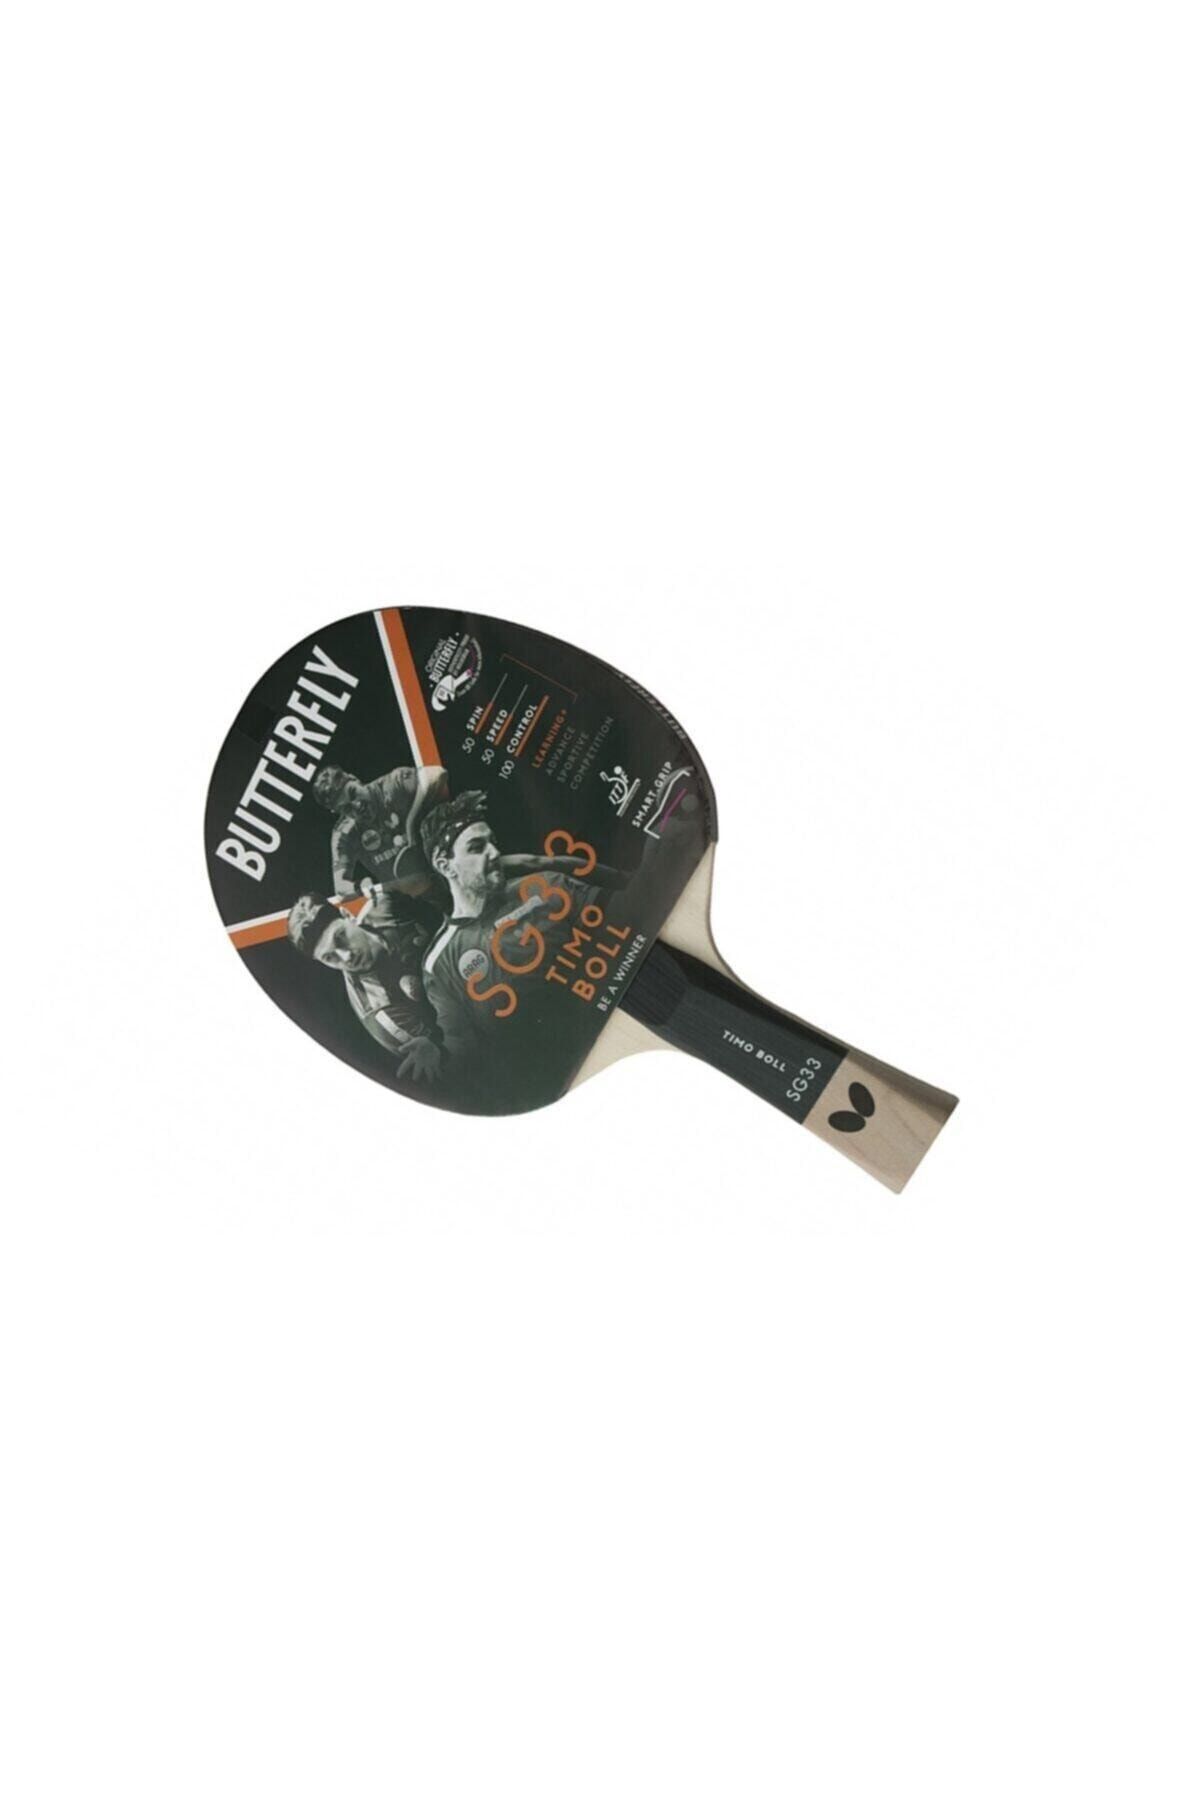 BUTTERFLY Timo Boll Sg33